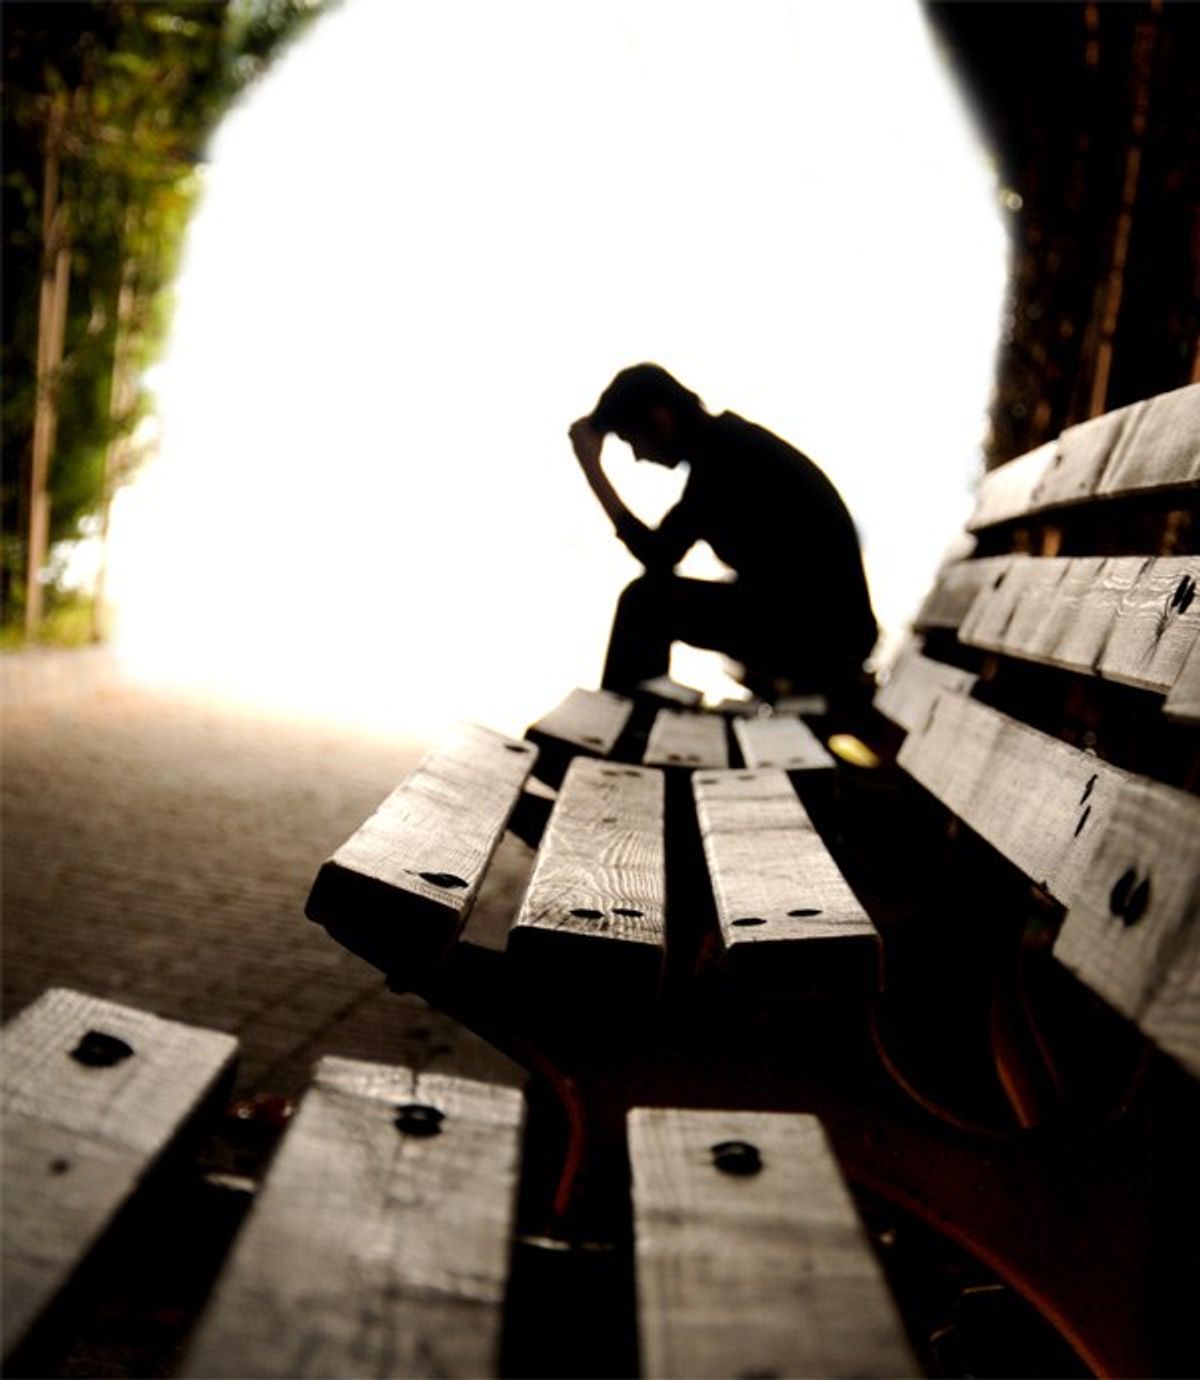 5 Things Only People With Depression and Anxiety Understand